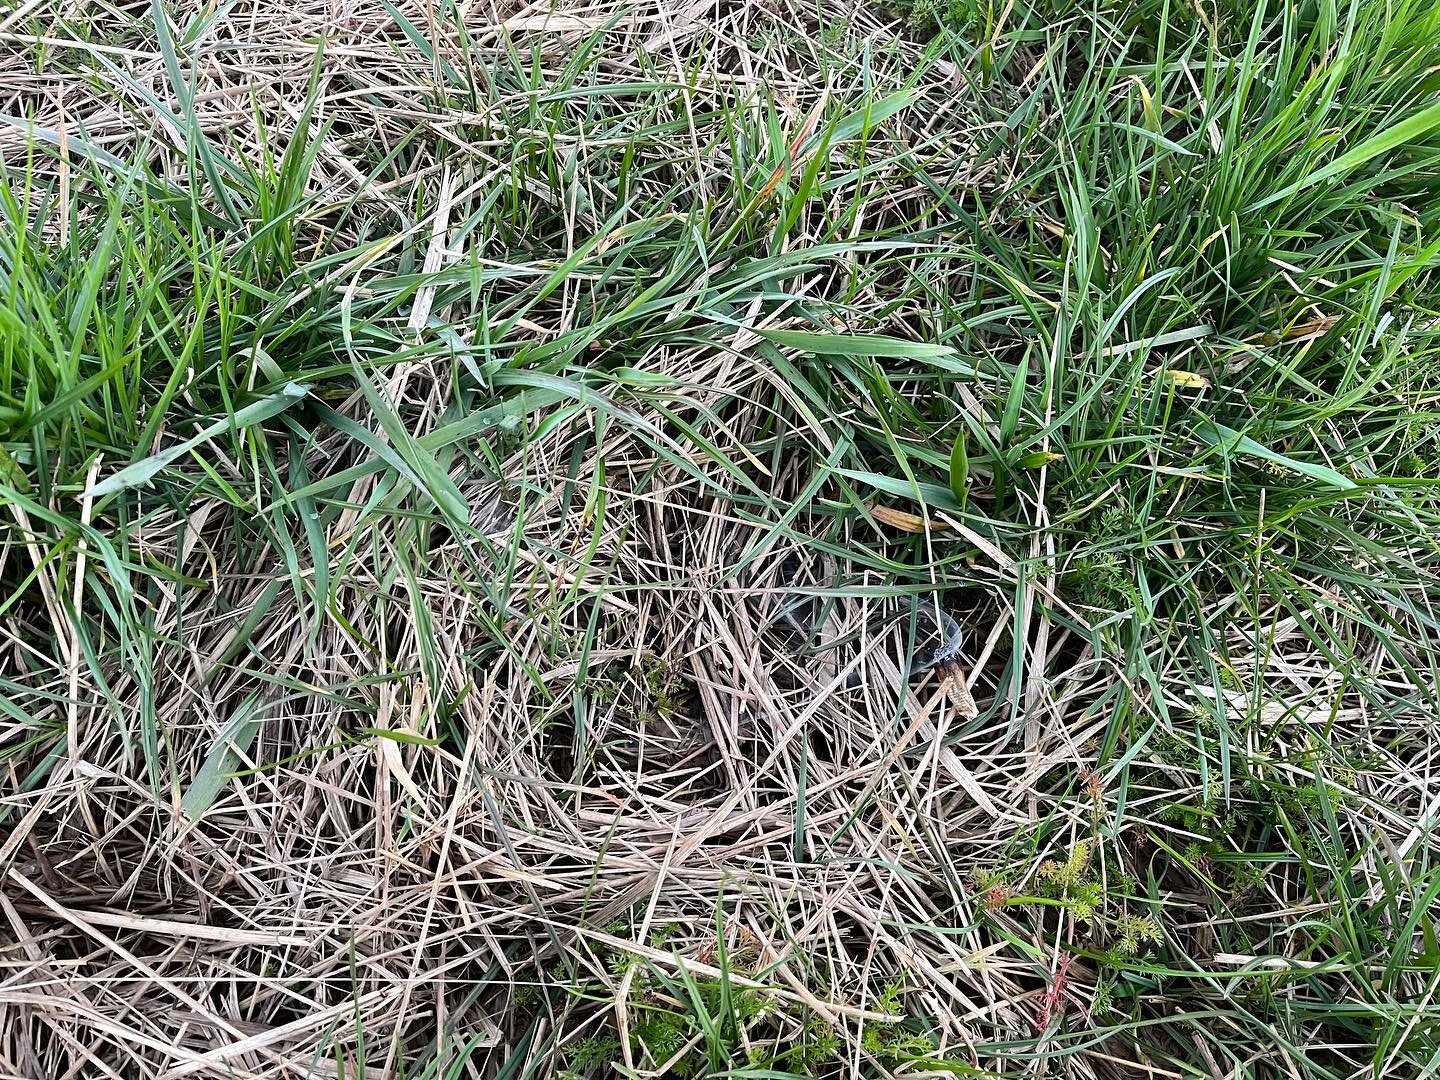 Grass is growing well right now. It&rsquo;s fun to watch it constantly, see the slight changes over time.

I feed out hay, cover the ground, then I watch for months until finally you can&rsquo;t really see the hay through the grass. 
But it&rsquo;s n